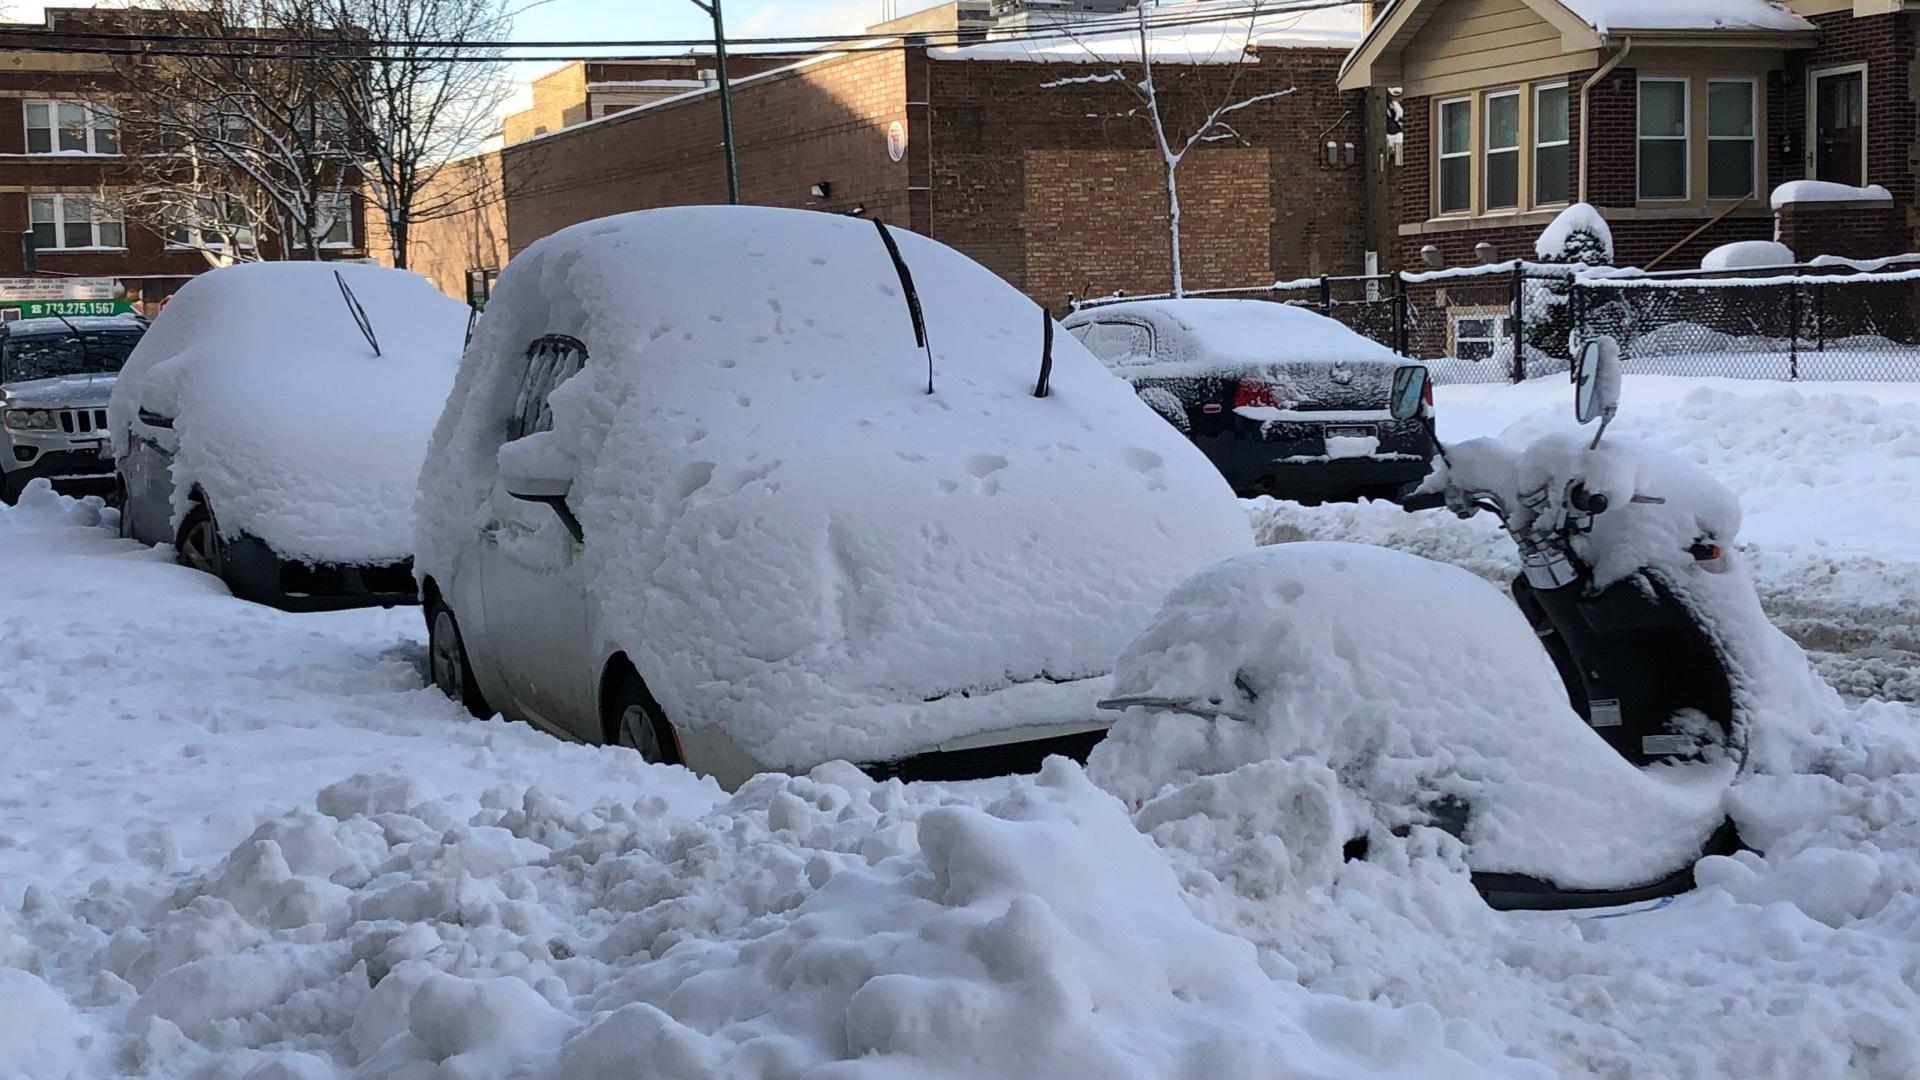 Nearly a foot of snow blanketed the Chicago region over the weekend, leaving cars covered Monday, Feb. 1. (Patty Wetli / WTTW News)